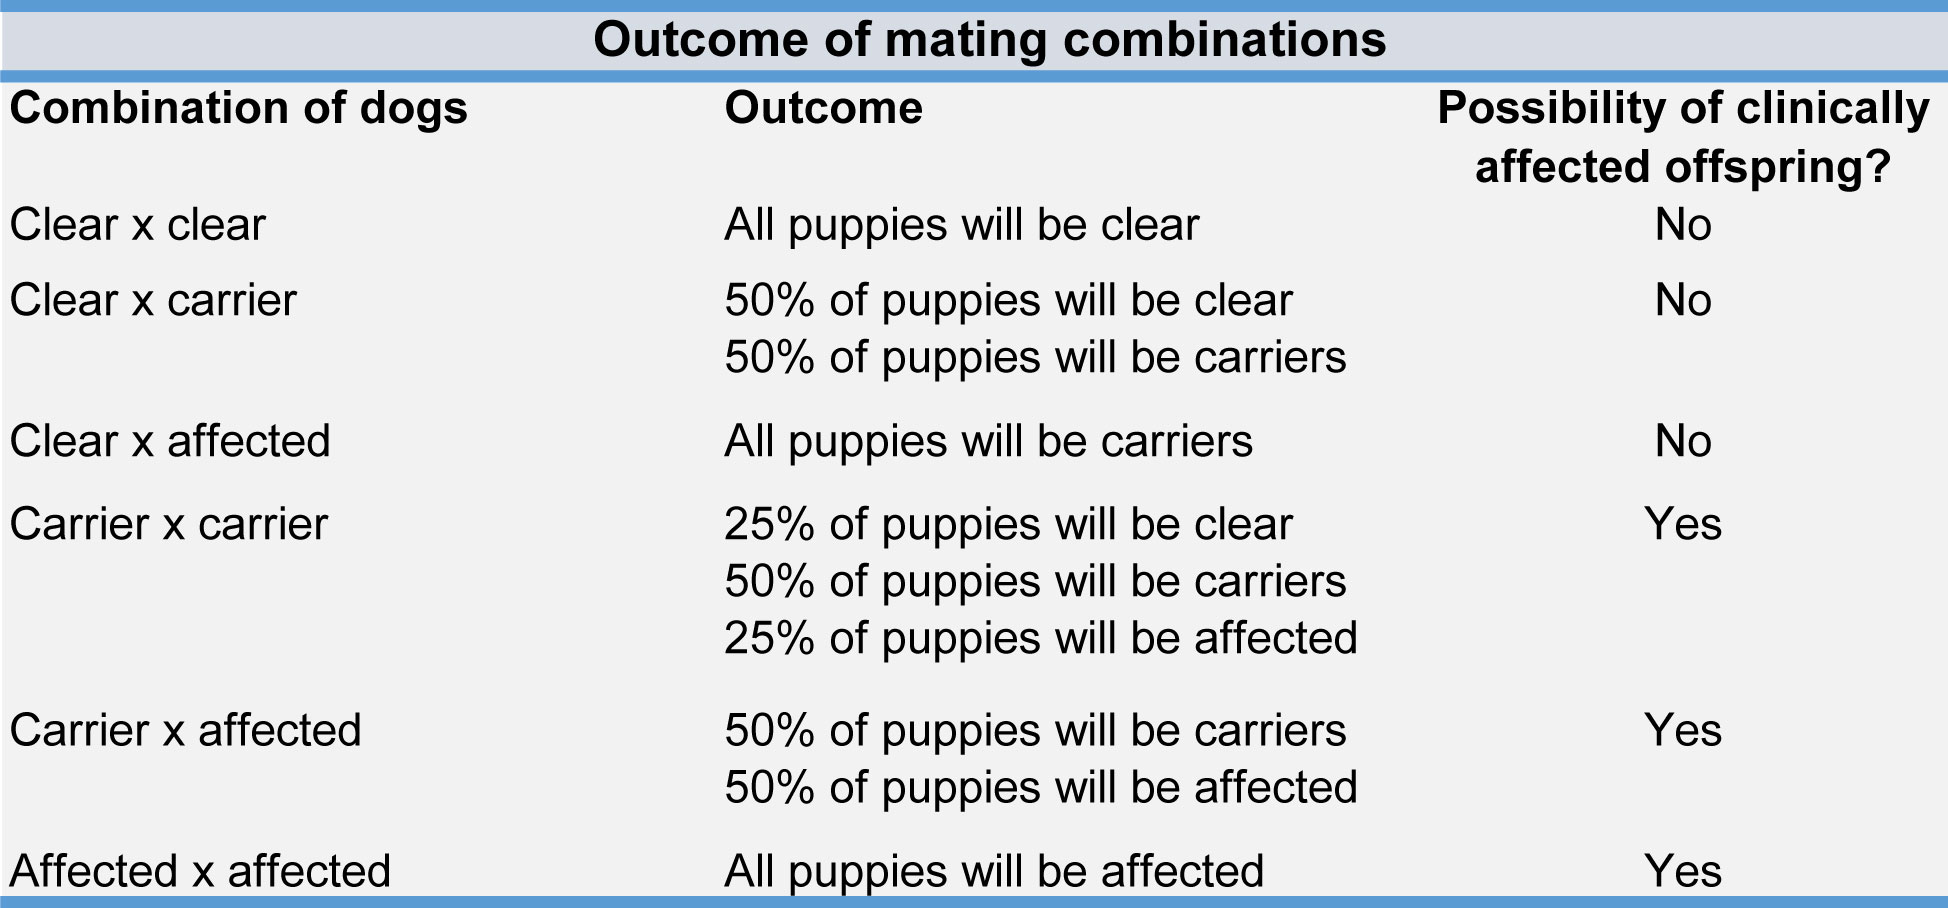 Outcome of mating combinations